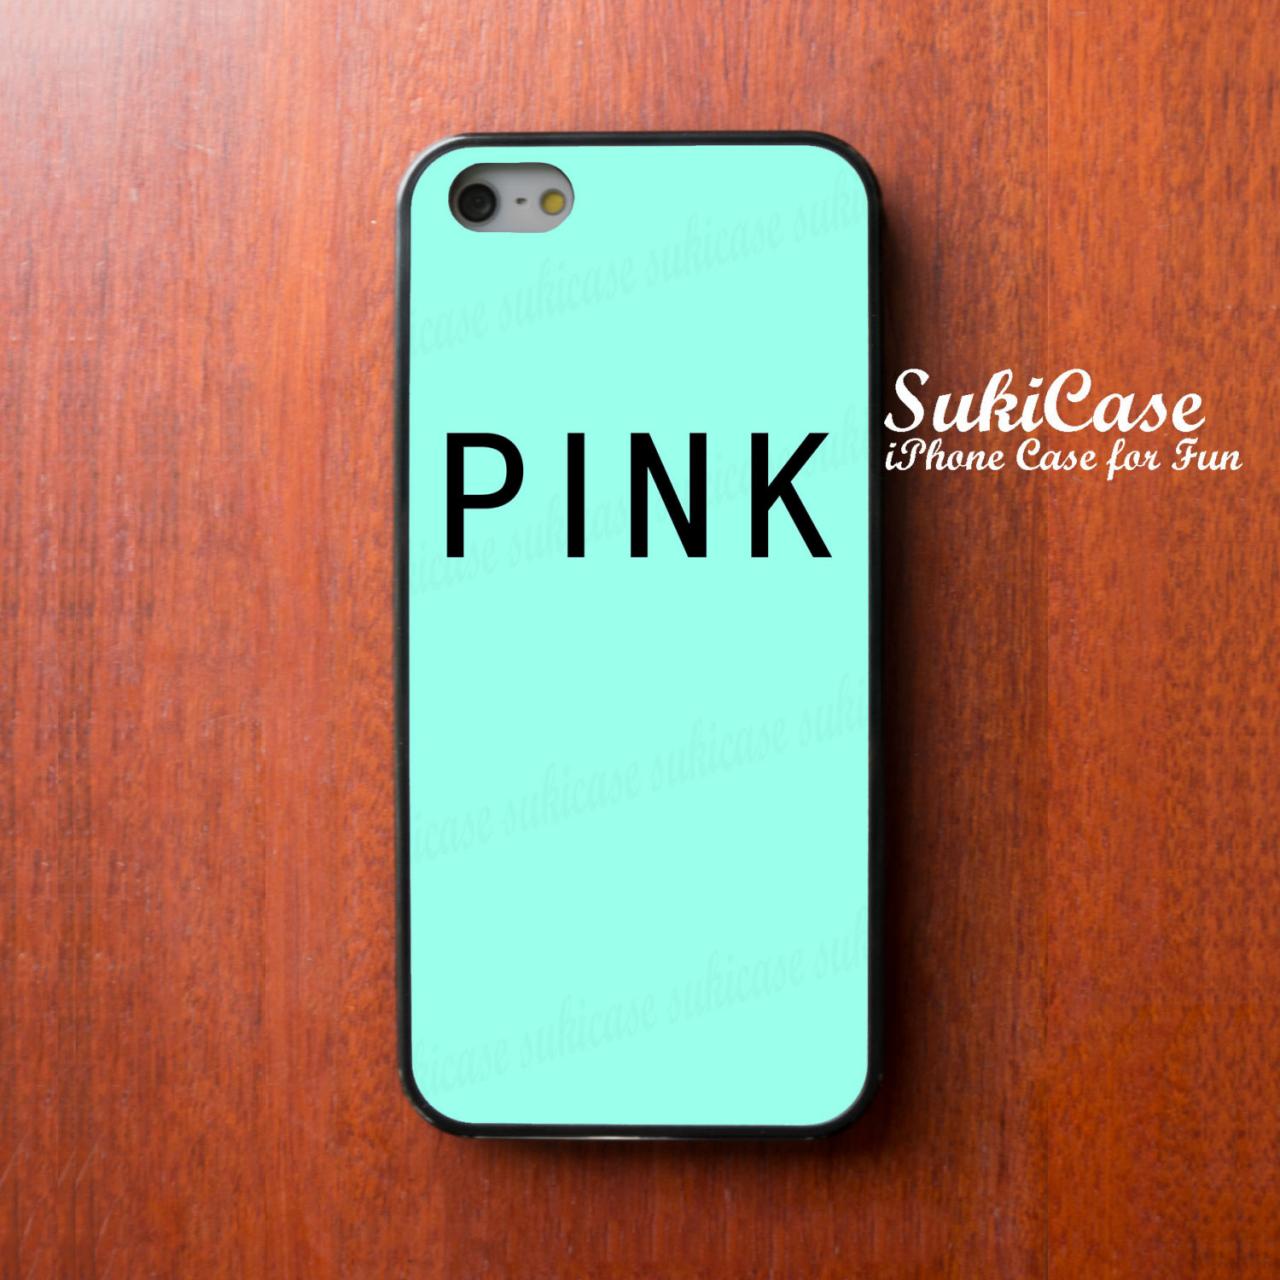 IPHONE 5 CASE PINK Word On Mint Parody Funny IPhone Case IPhone 5 Case  IPhone 4 Case Samsung Galaxy on Luulla